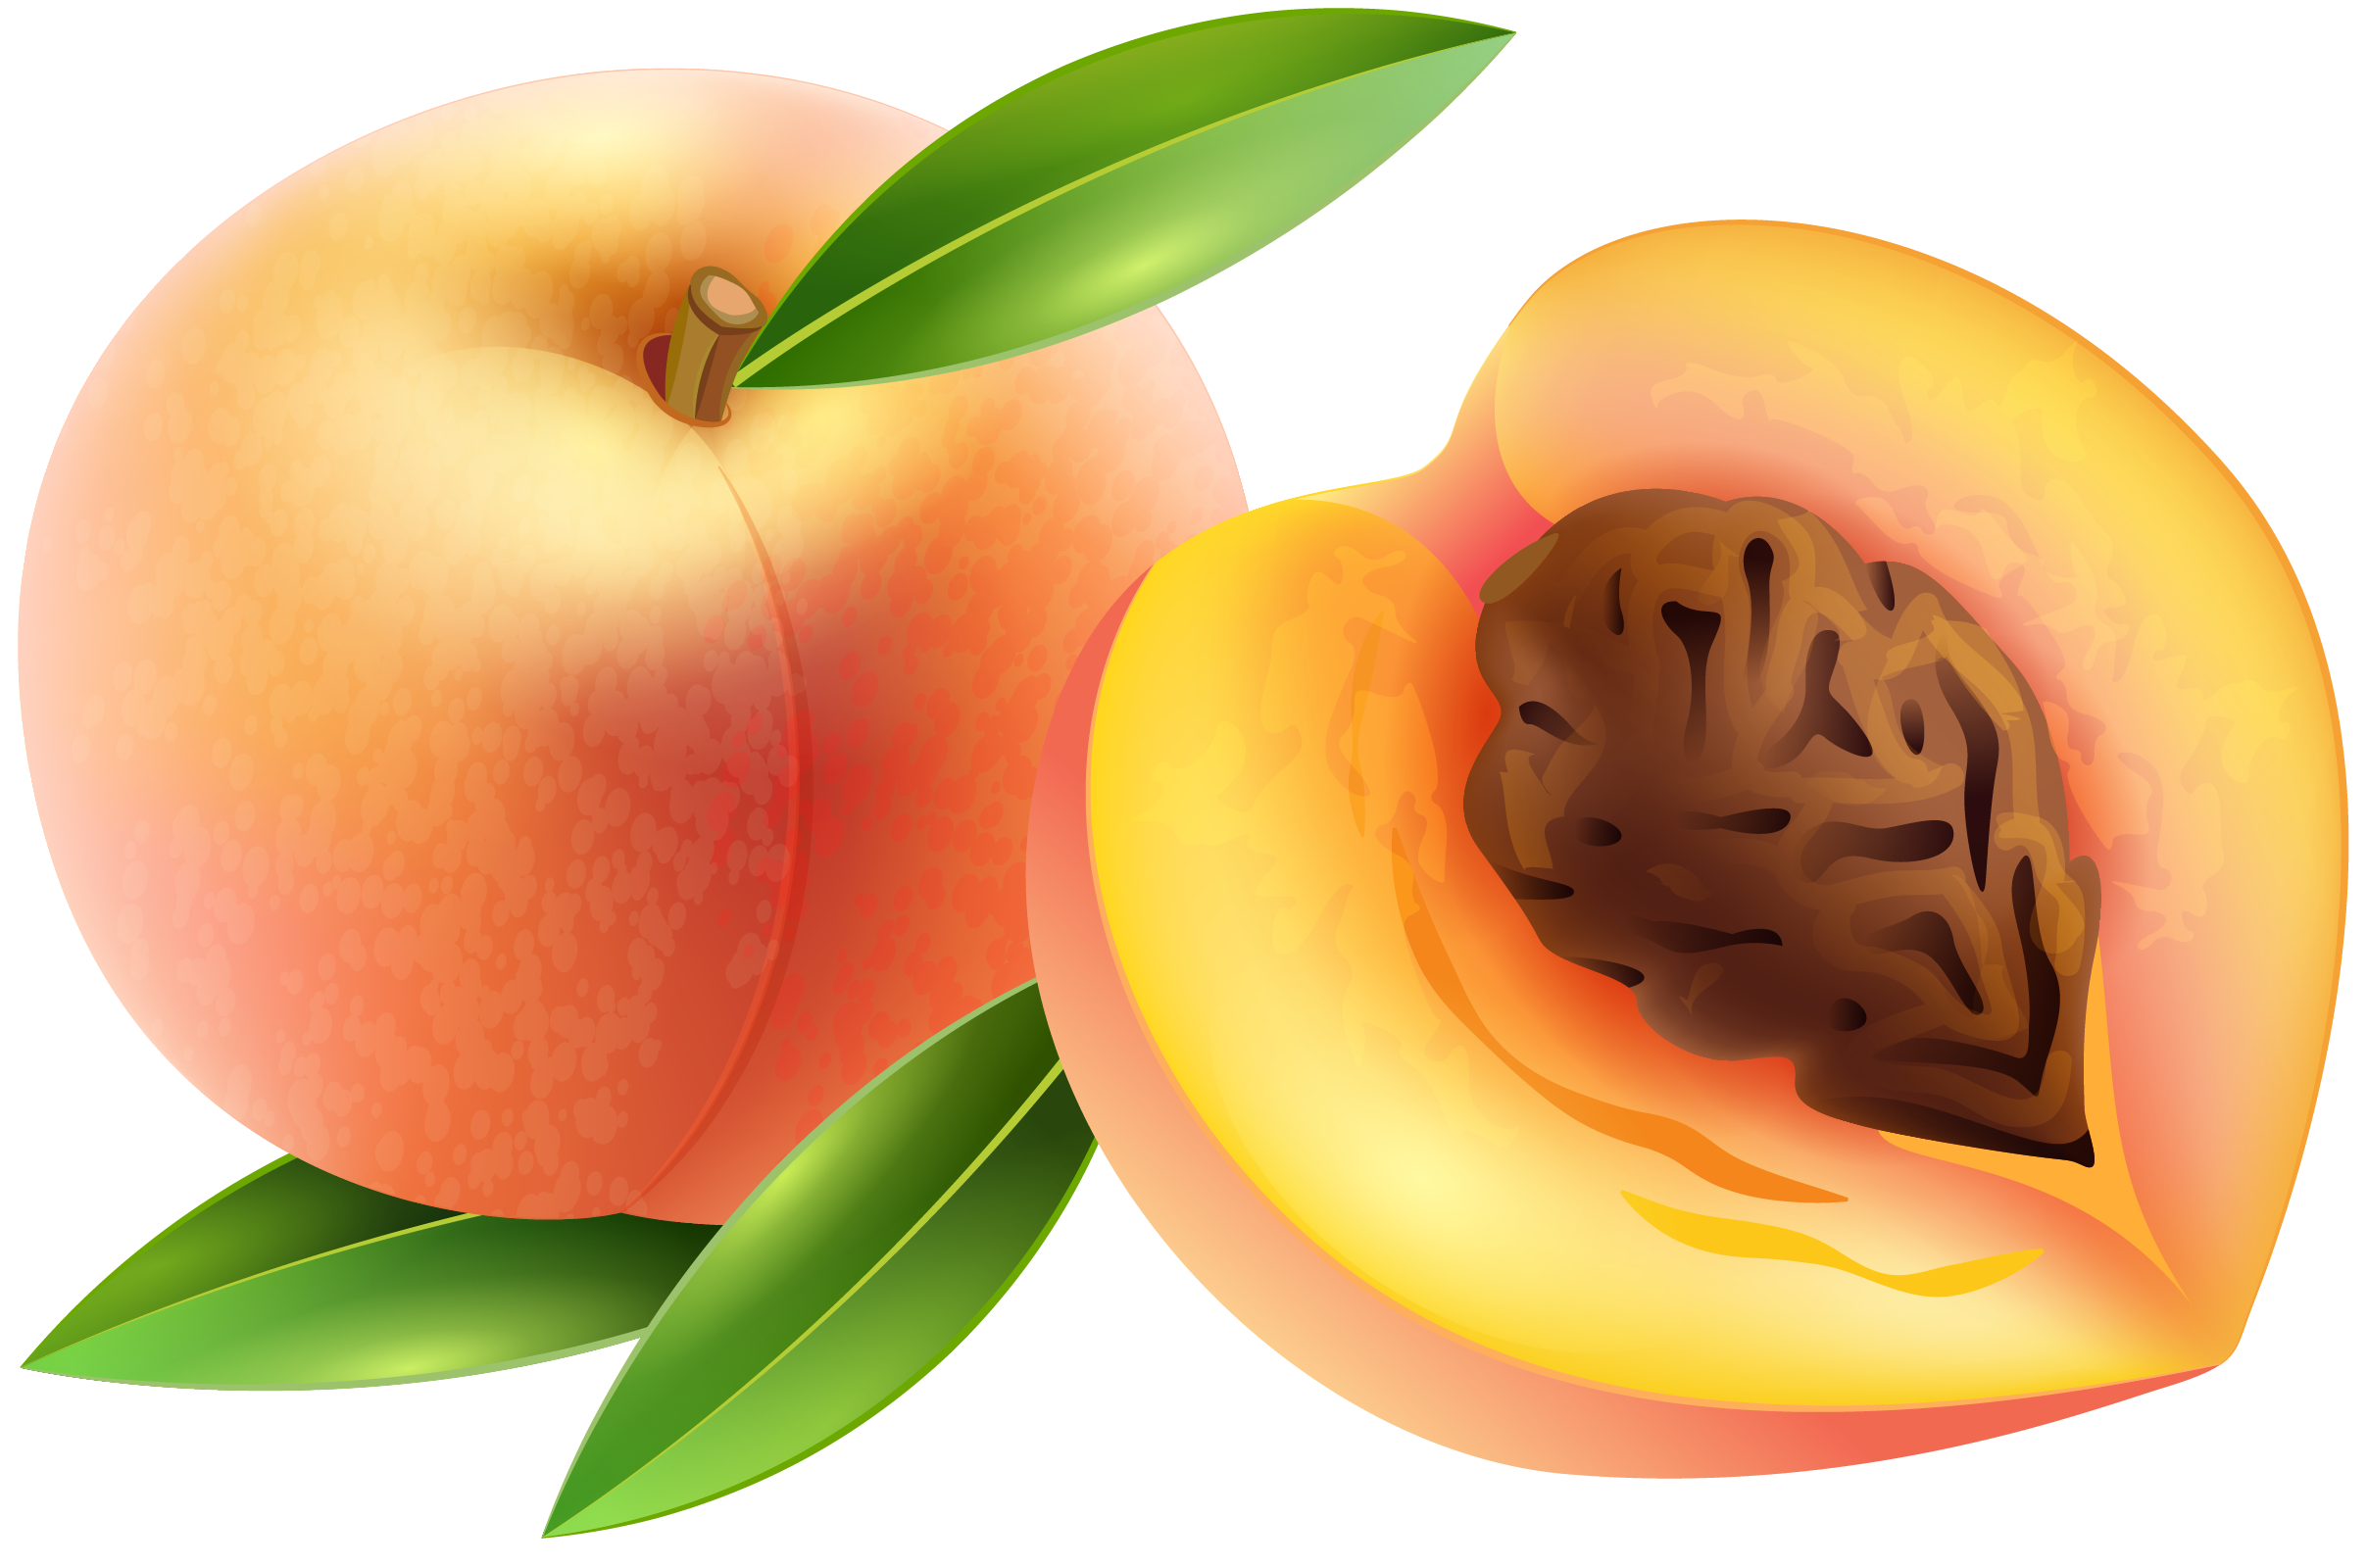 Sliced apricot PNG